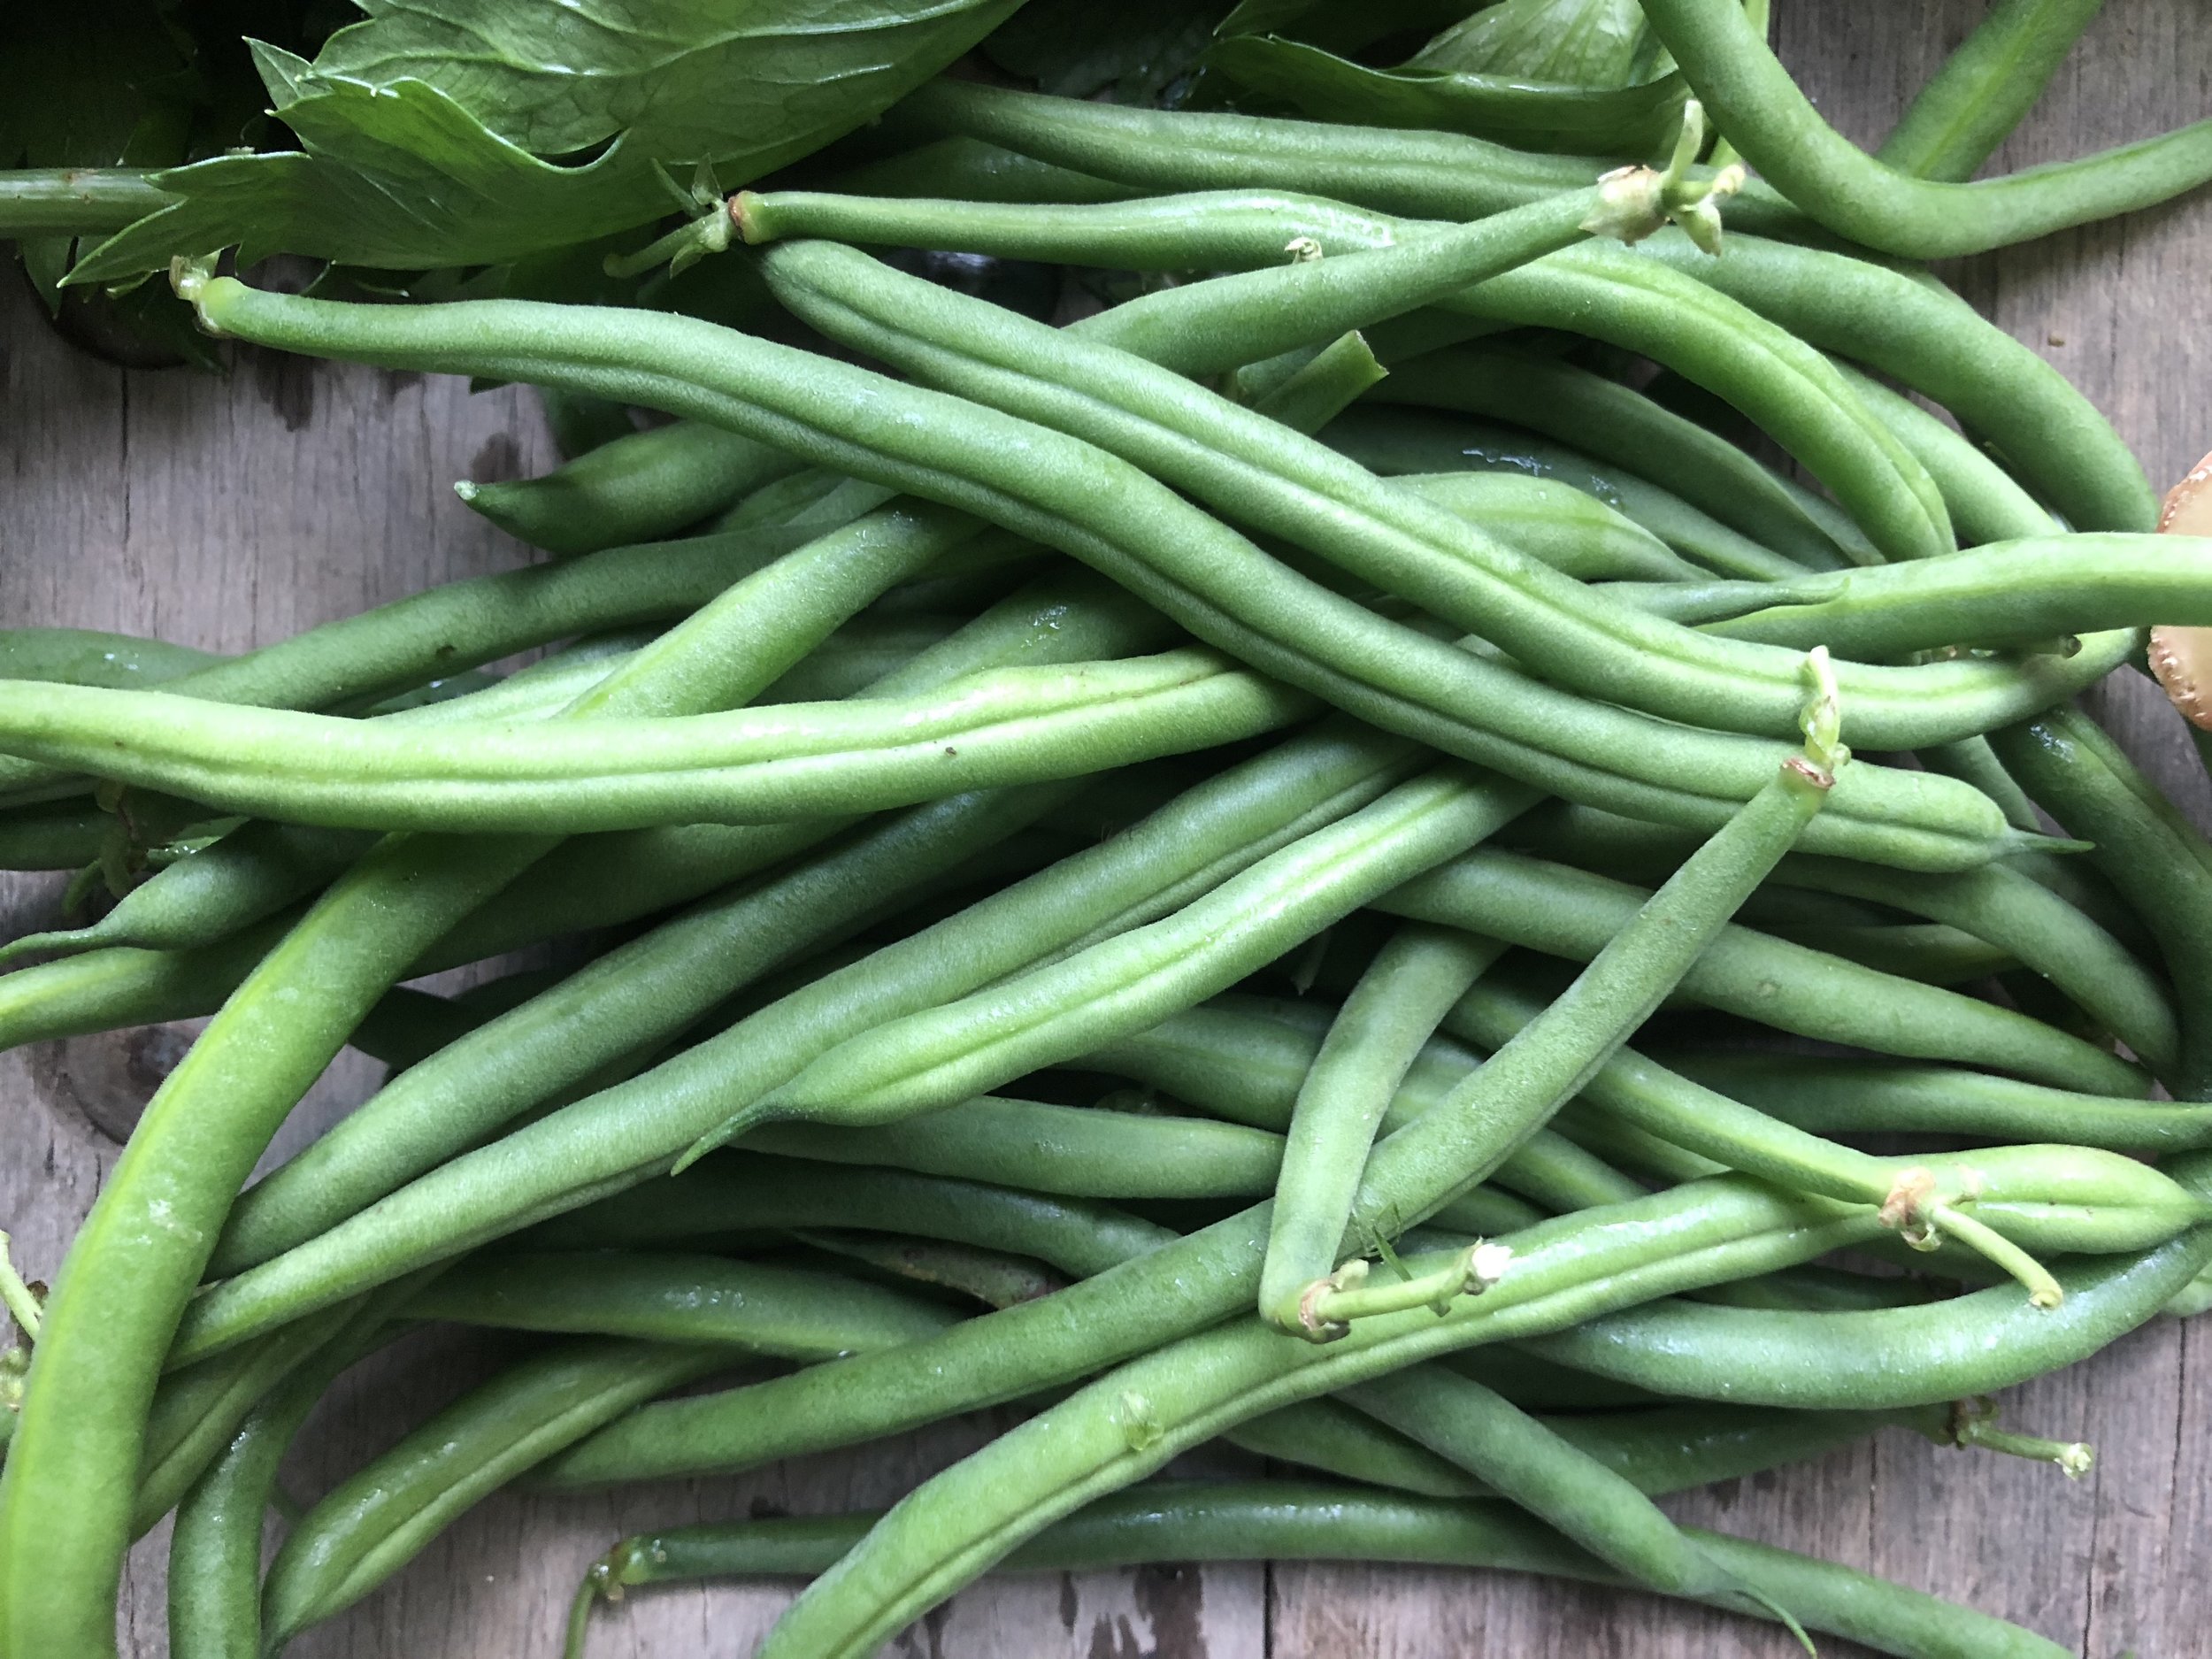  Hey there! Green beans!   